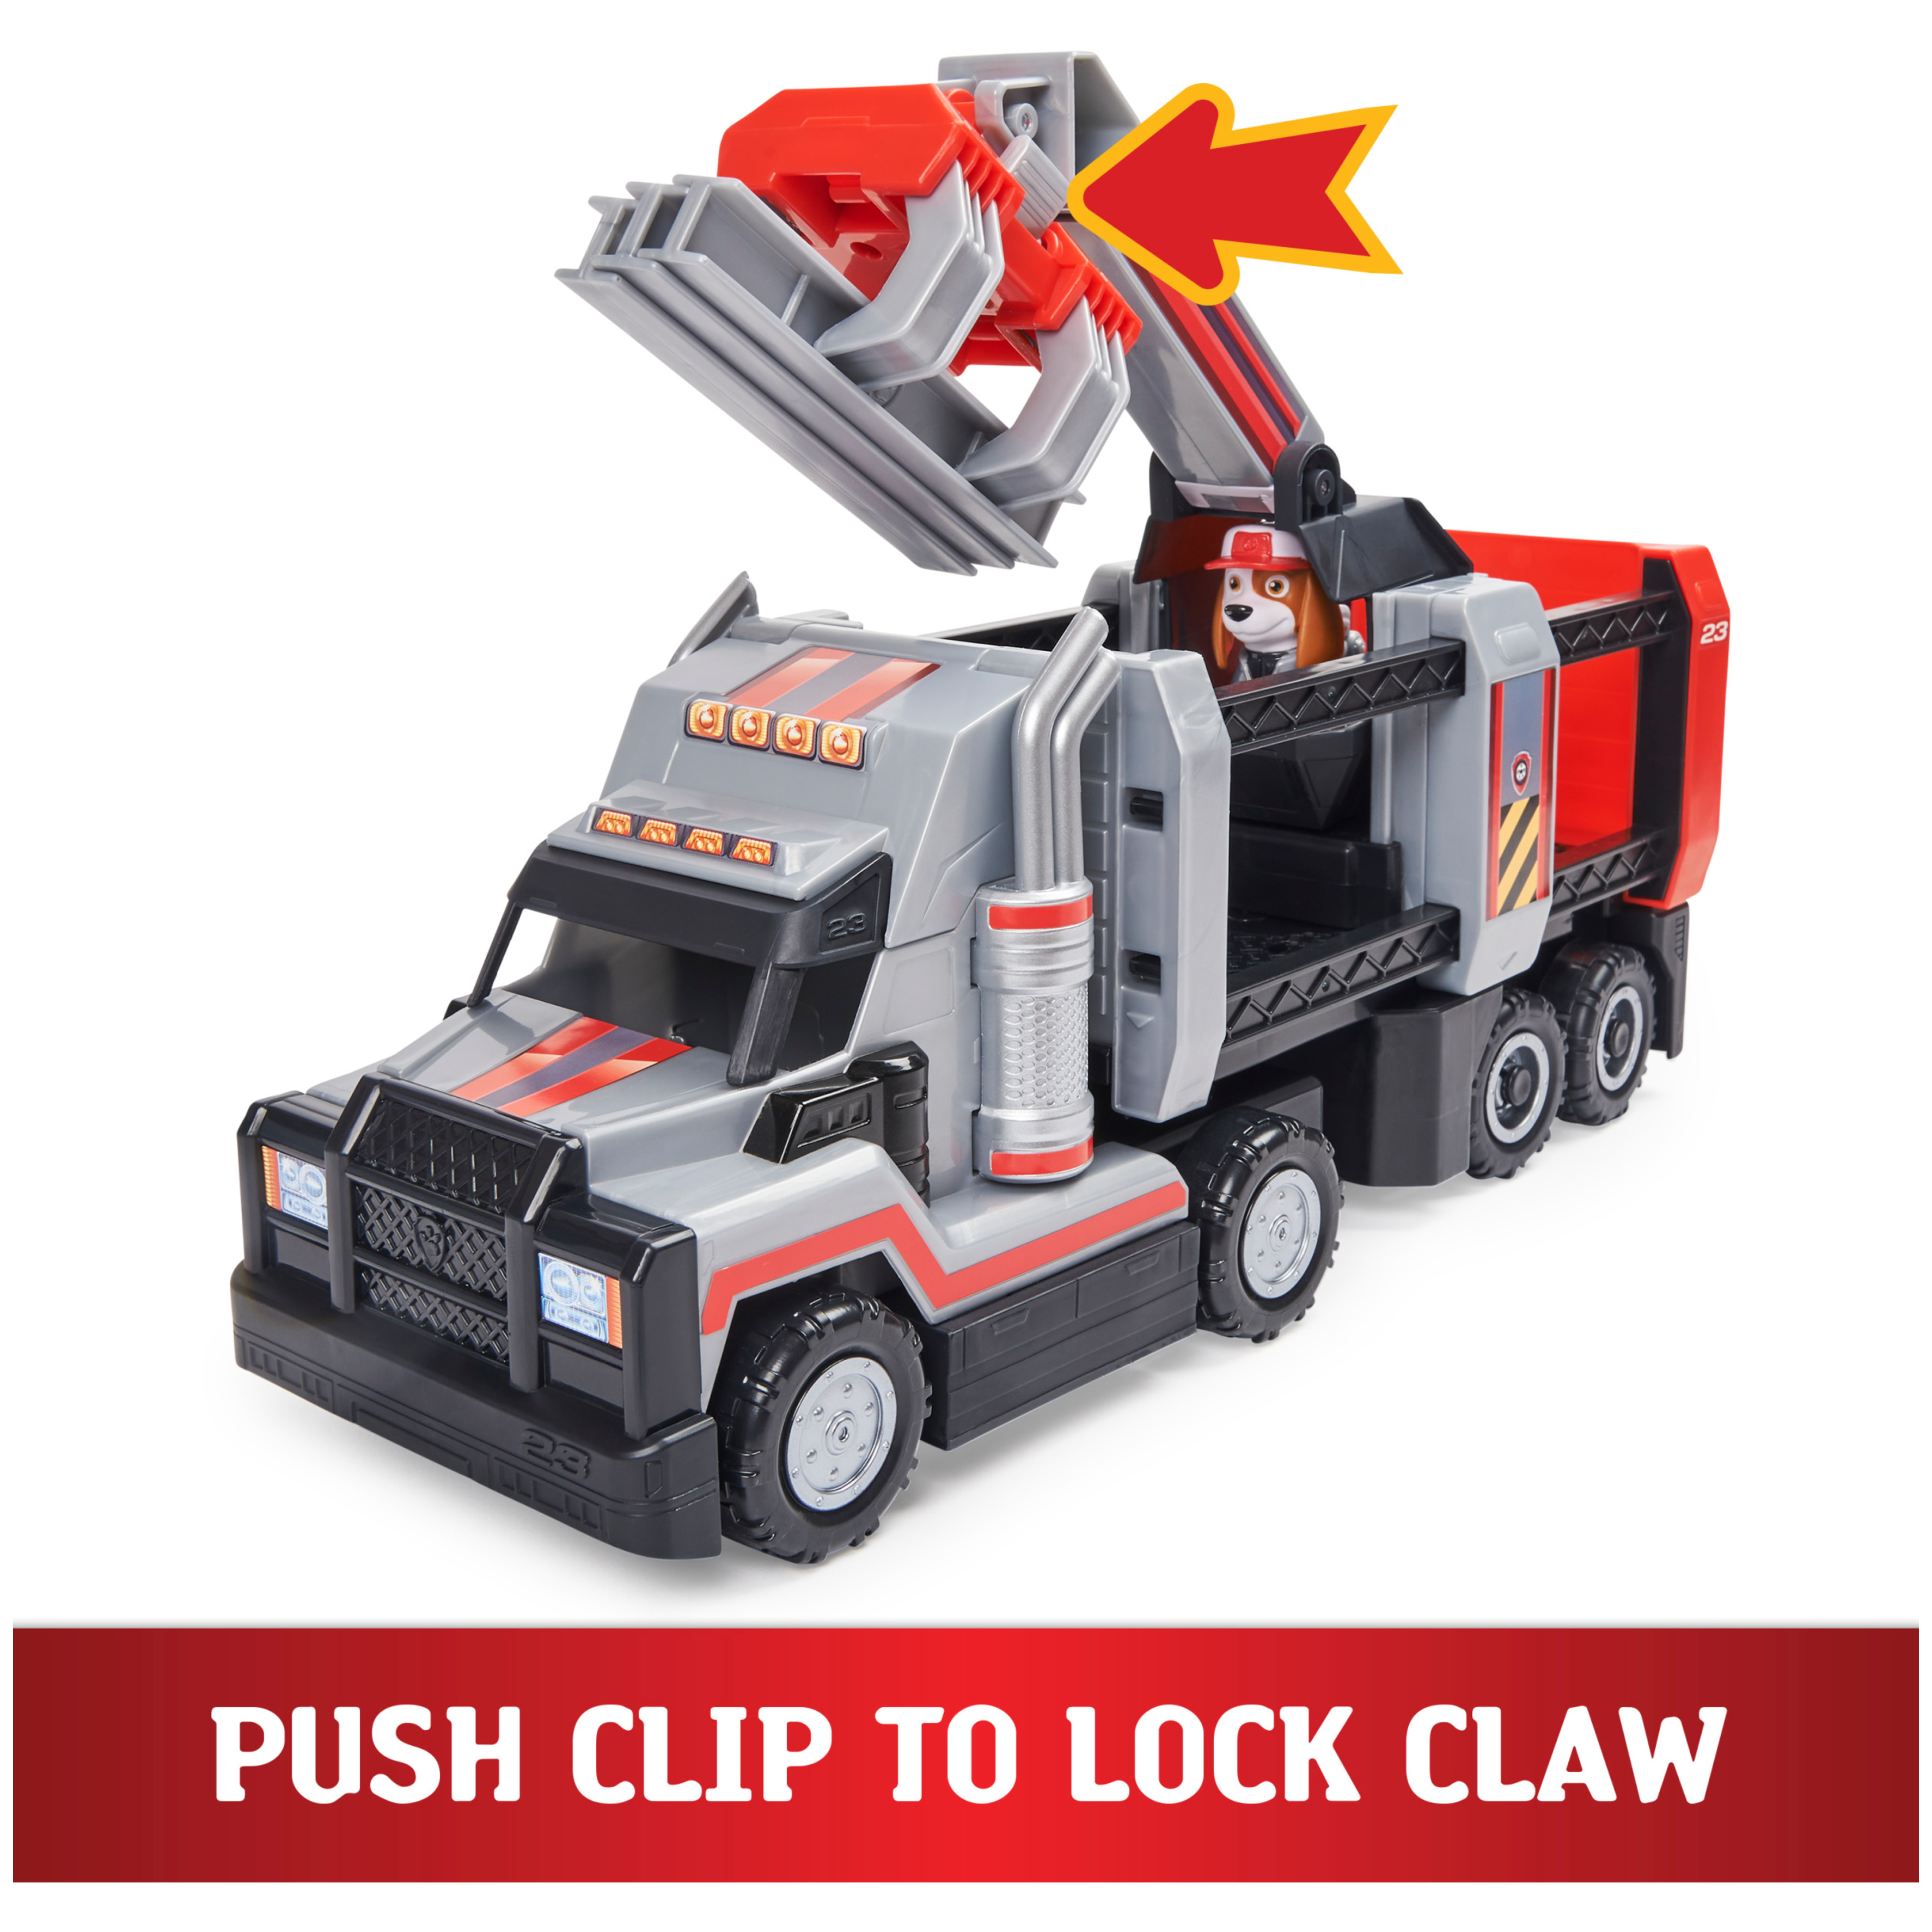 PAW Patrol, Al’s Deluxe Big Truck Toy with Moveable Claw Arm and Accessories - image 5 of 8